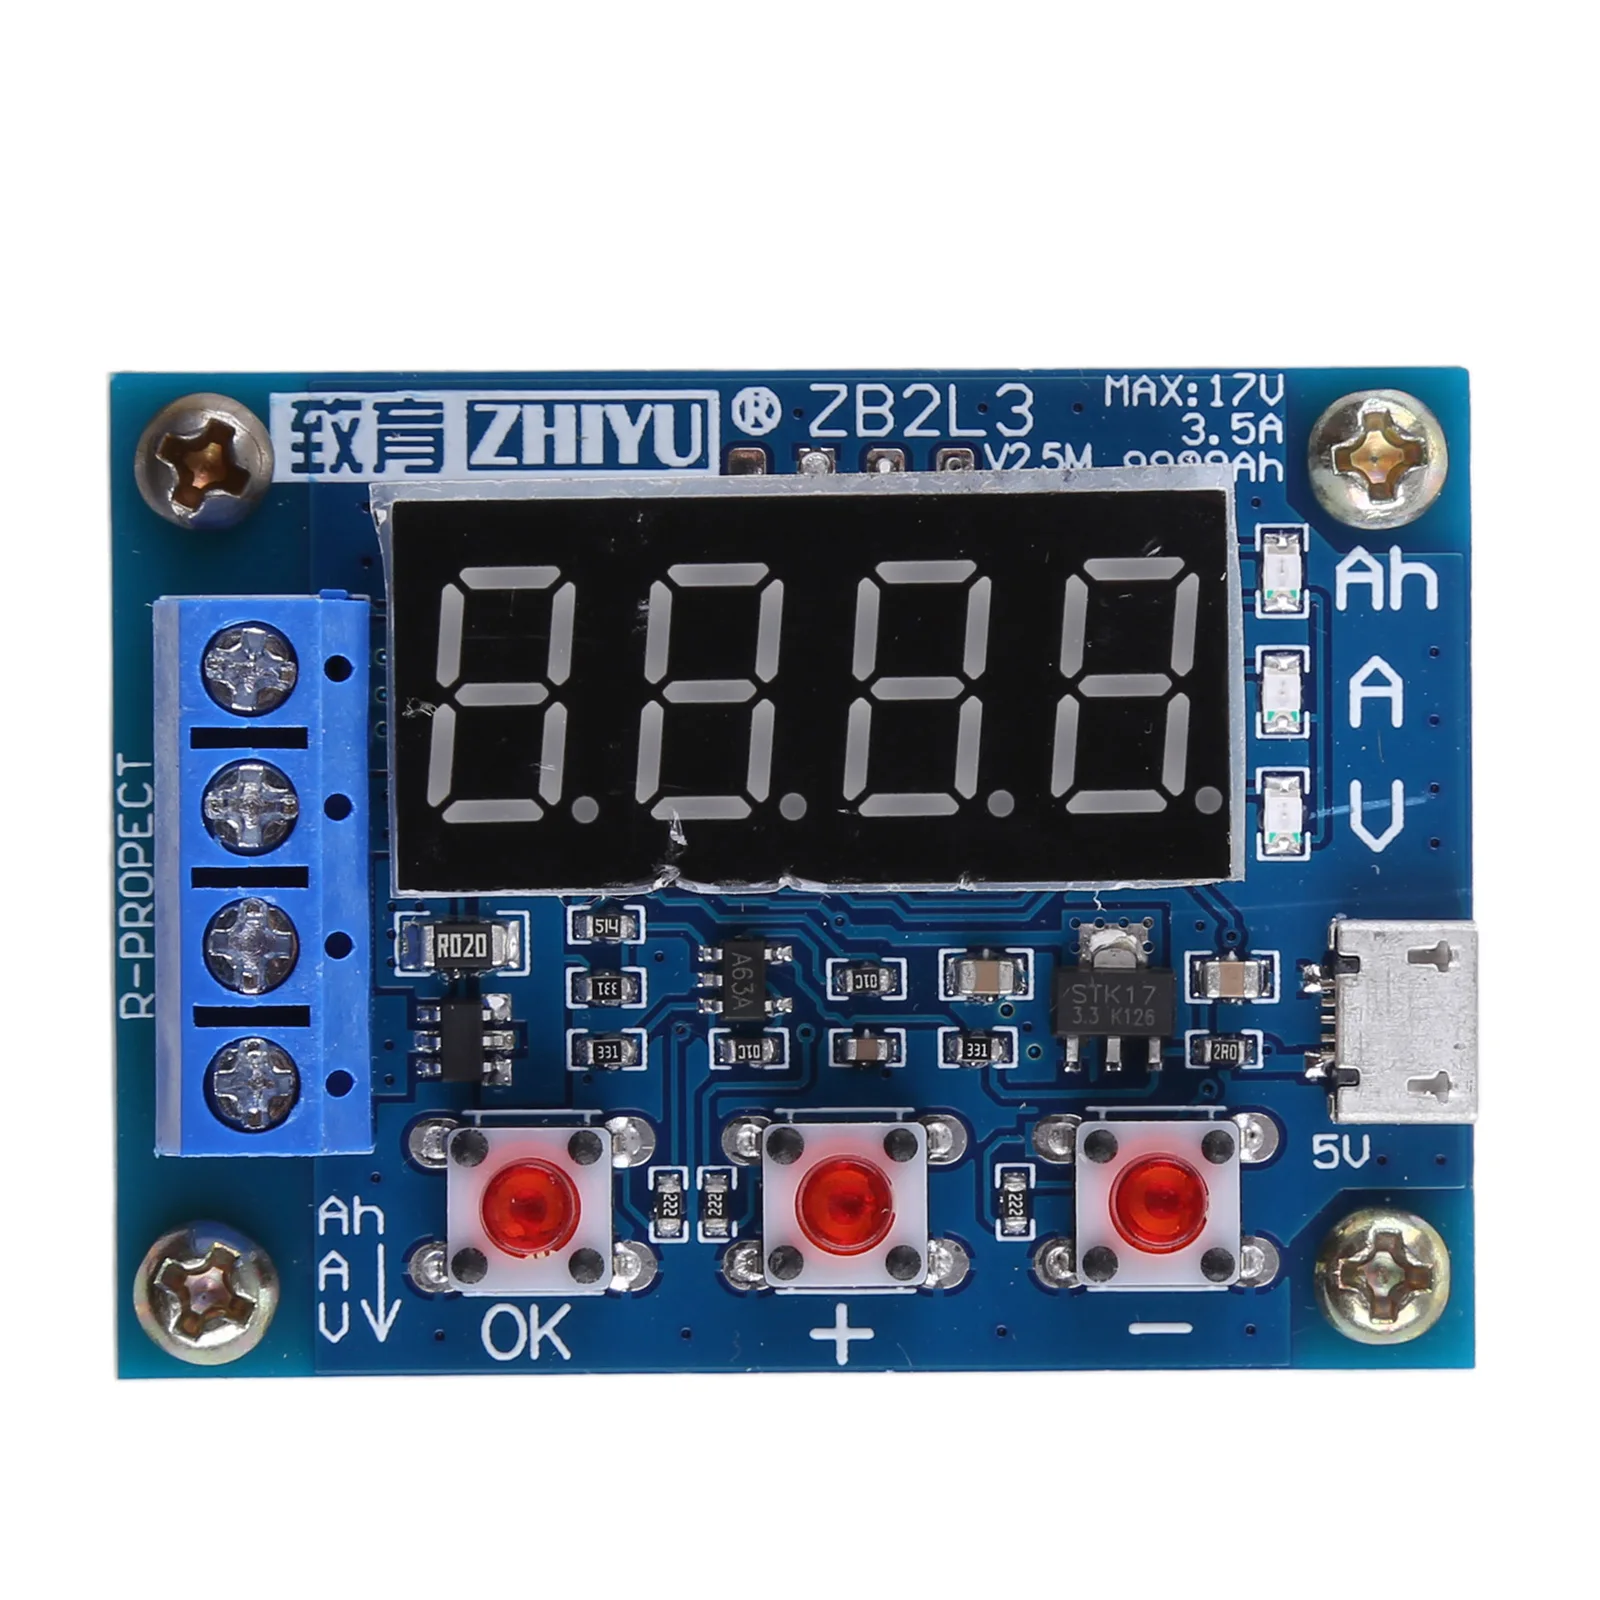 

1.2v 12v ZB2L3 18650 Li-ion Lithium Battery Capacity Tester Accuracy Measurement for Testing Voltage Discharge Capacity